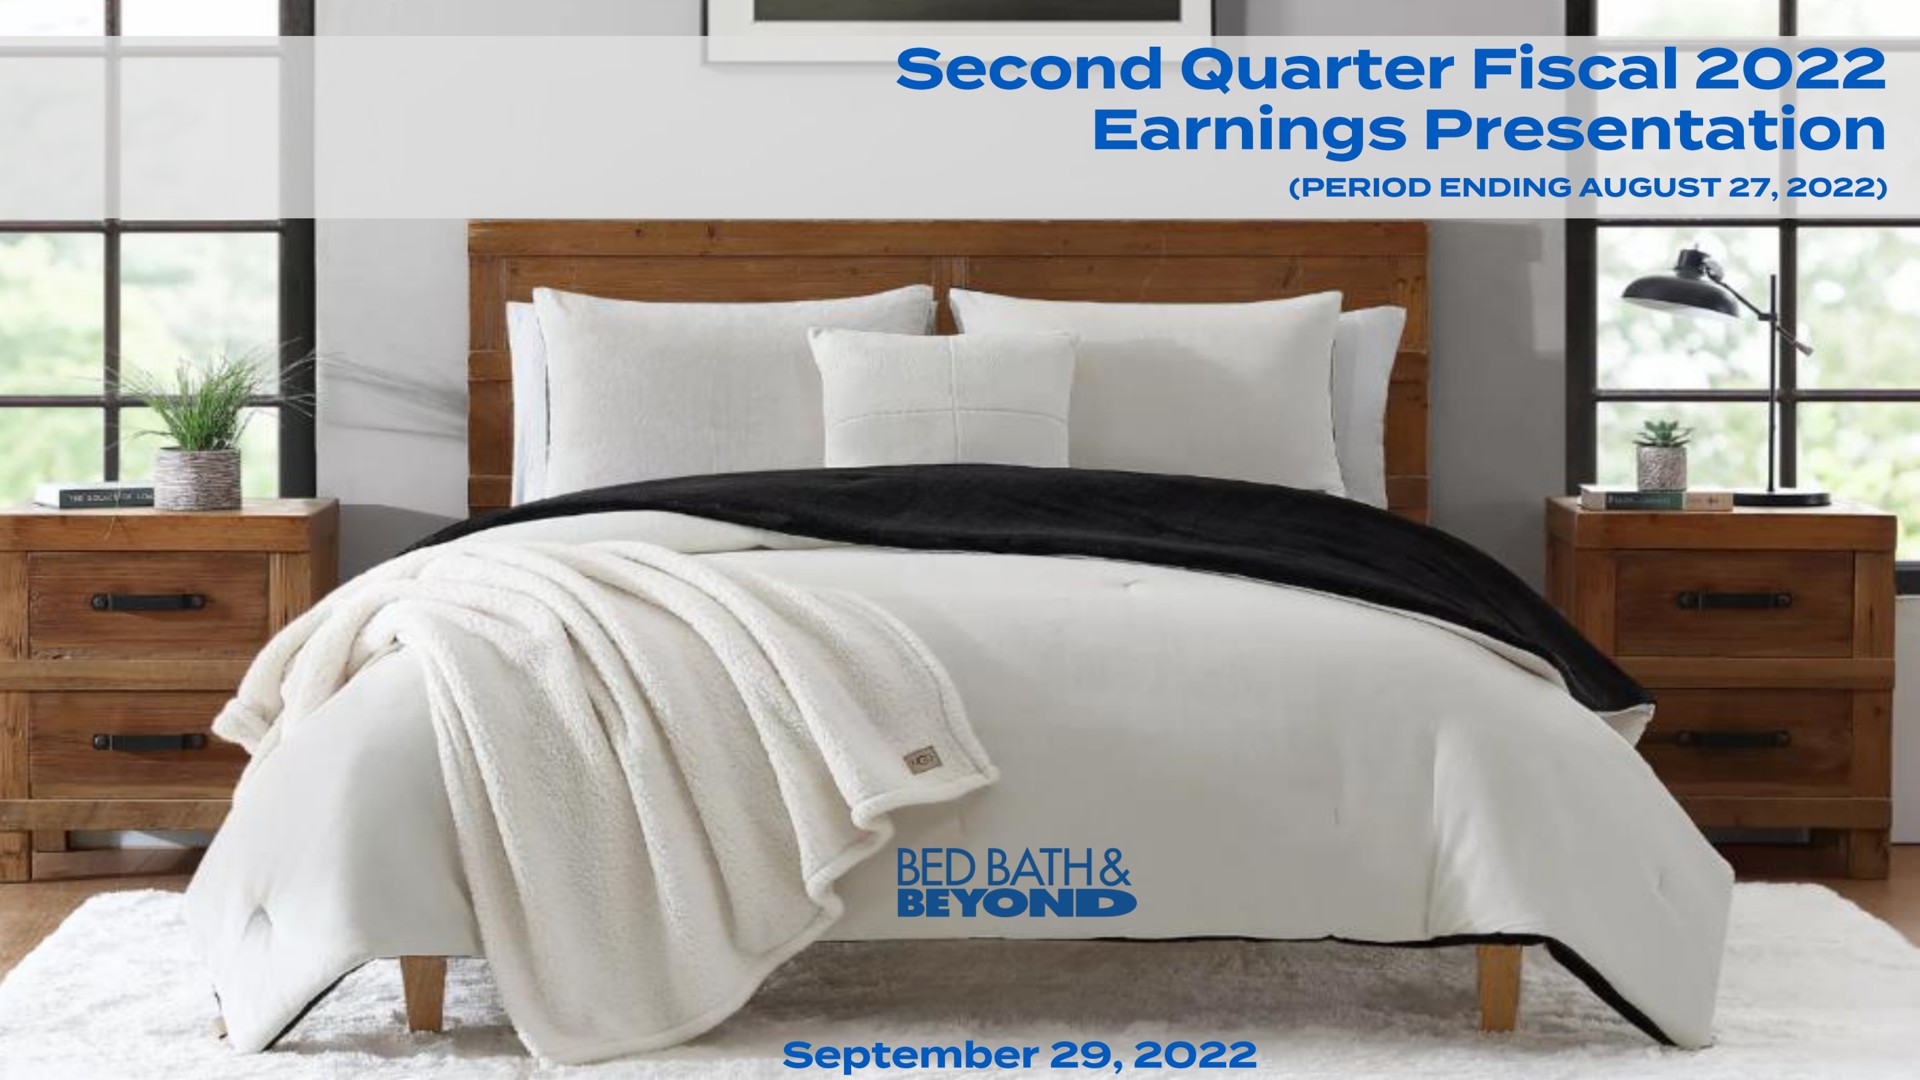 draft restricted confidential second quarter fiscal earnings presentation baths beyond | Bed Bath & Beyond